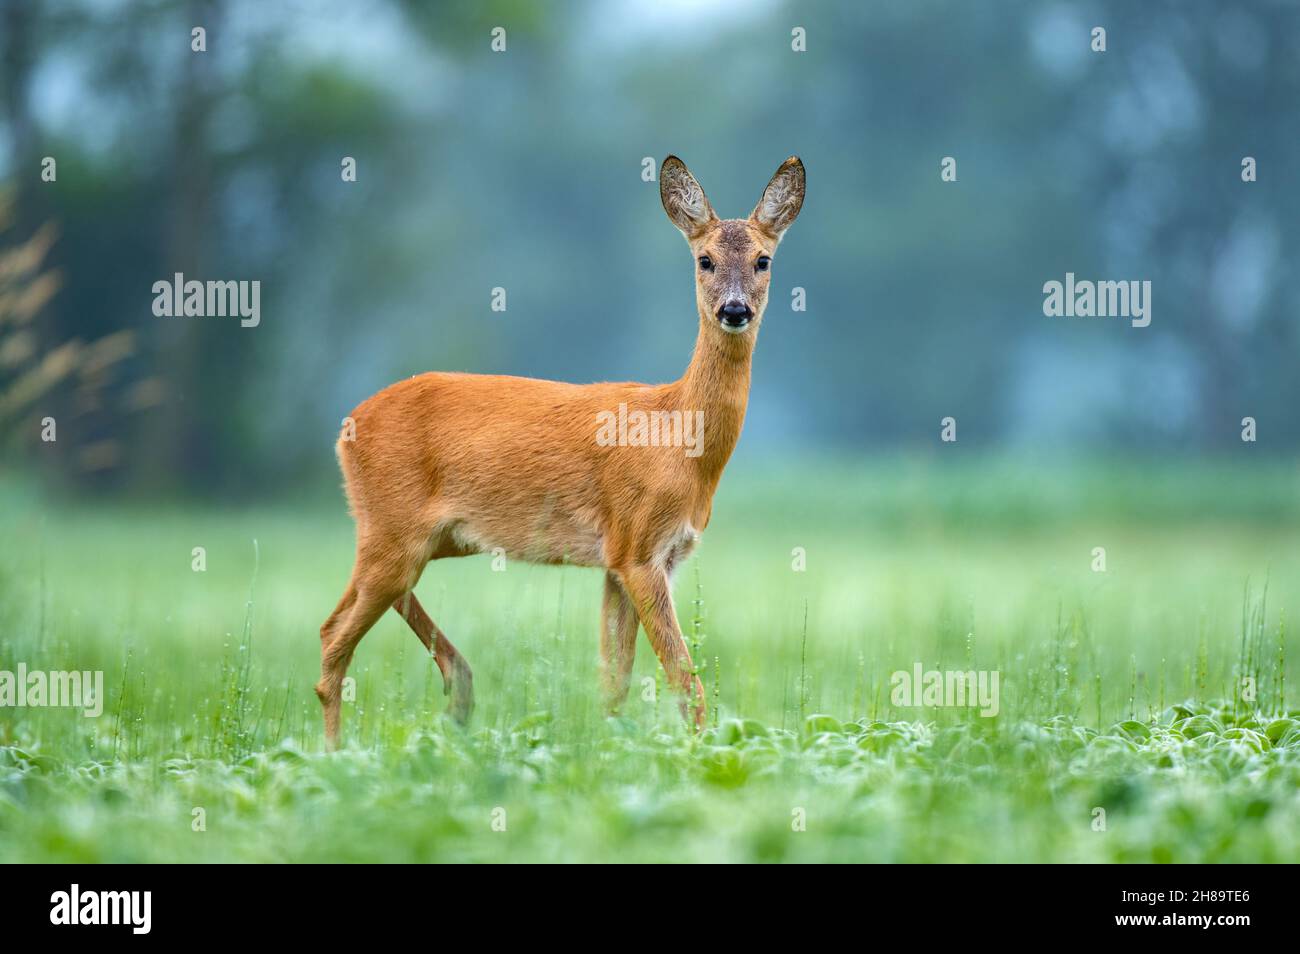 Female roe deer standing in a field and looking at the camera Stock Photo